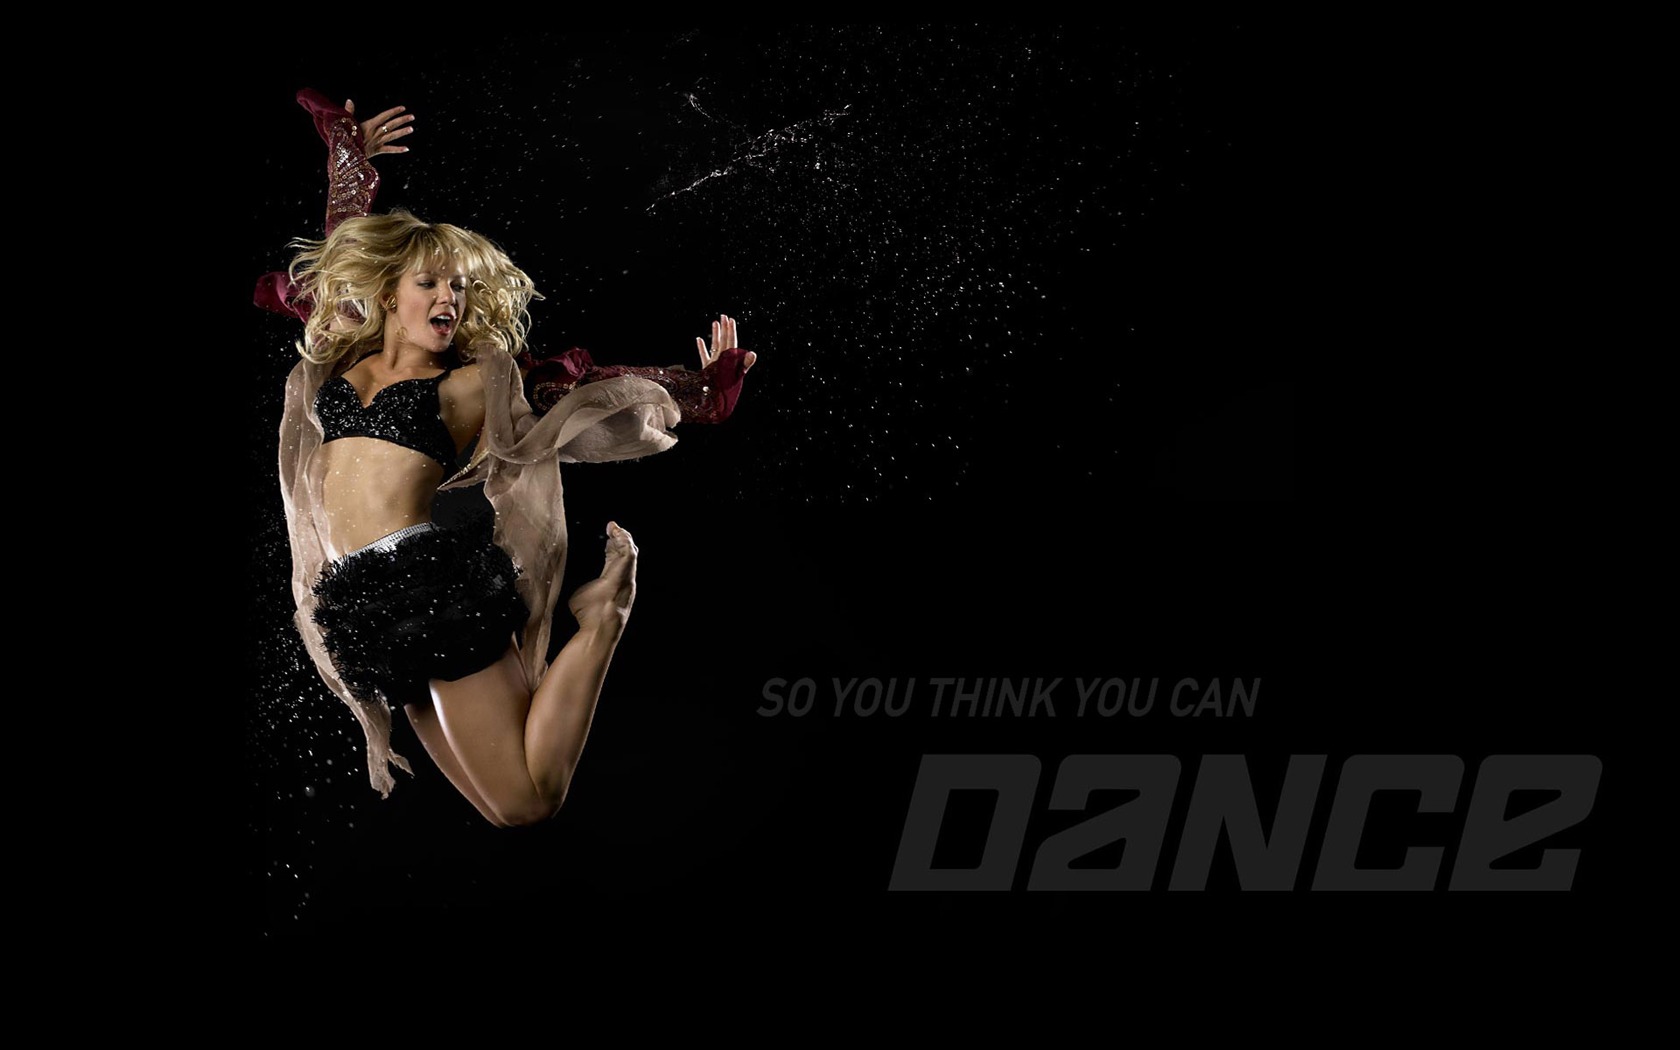 So You Think You Can Dance wallpaper (1) #7 - 1680x1050